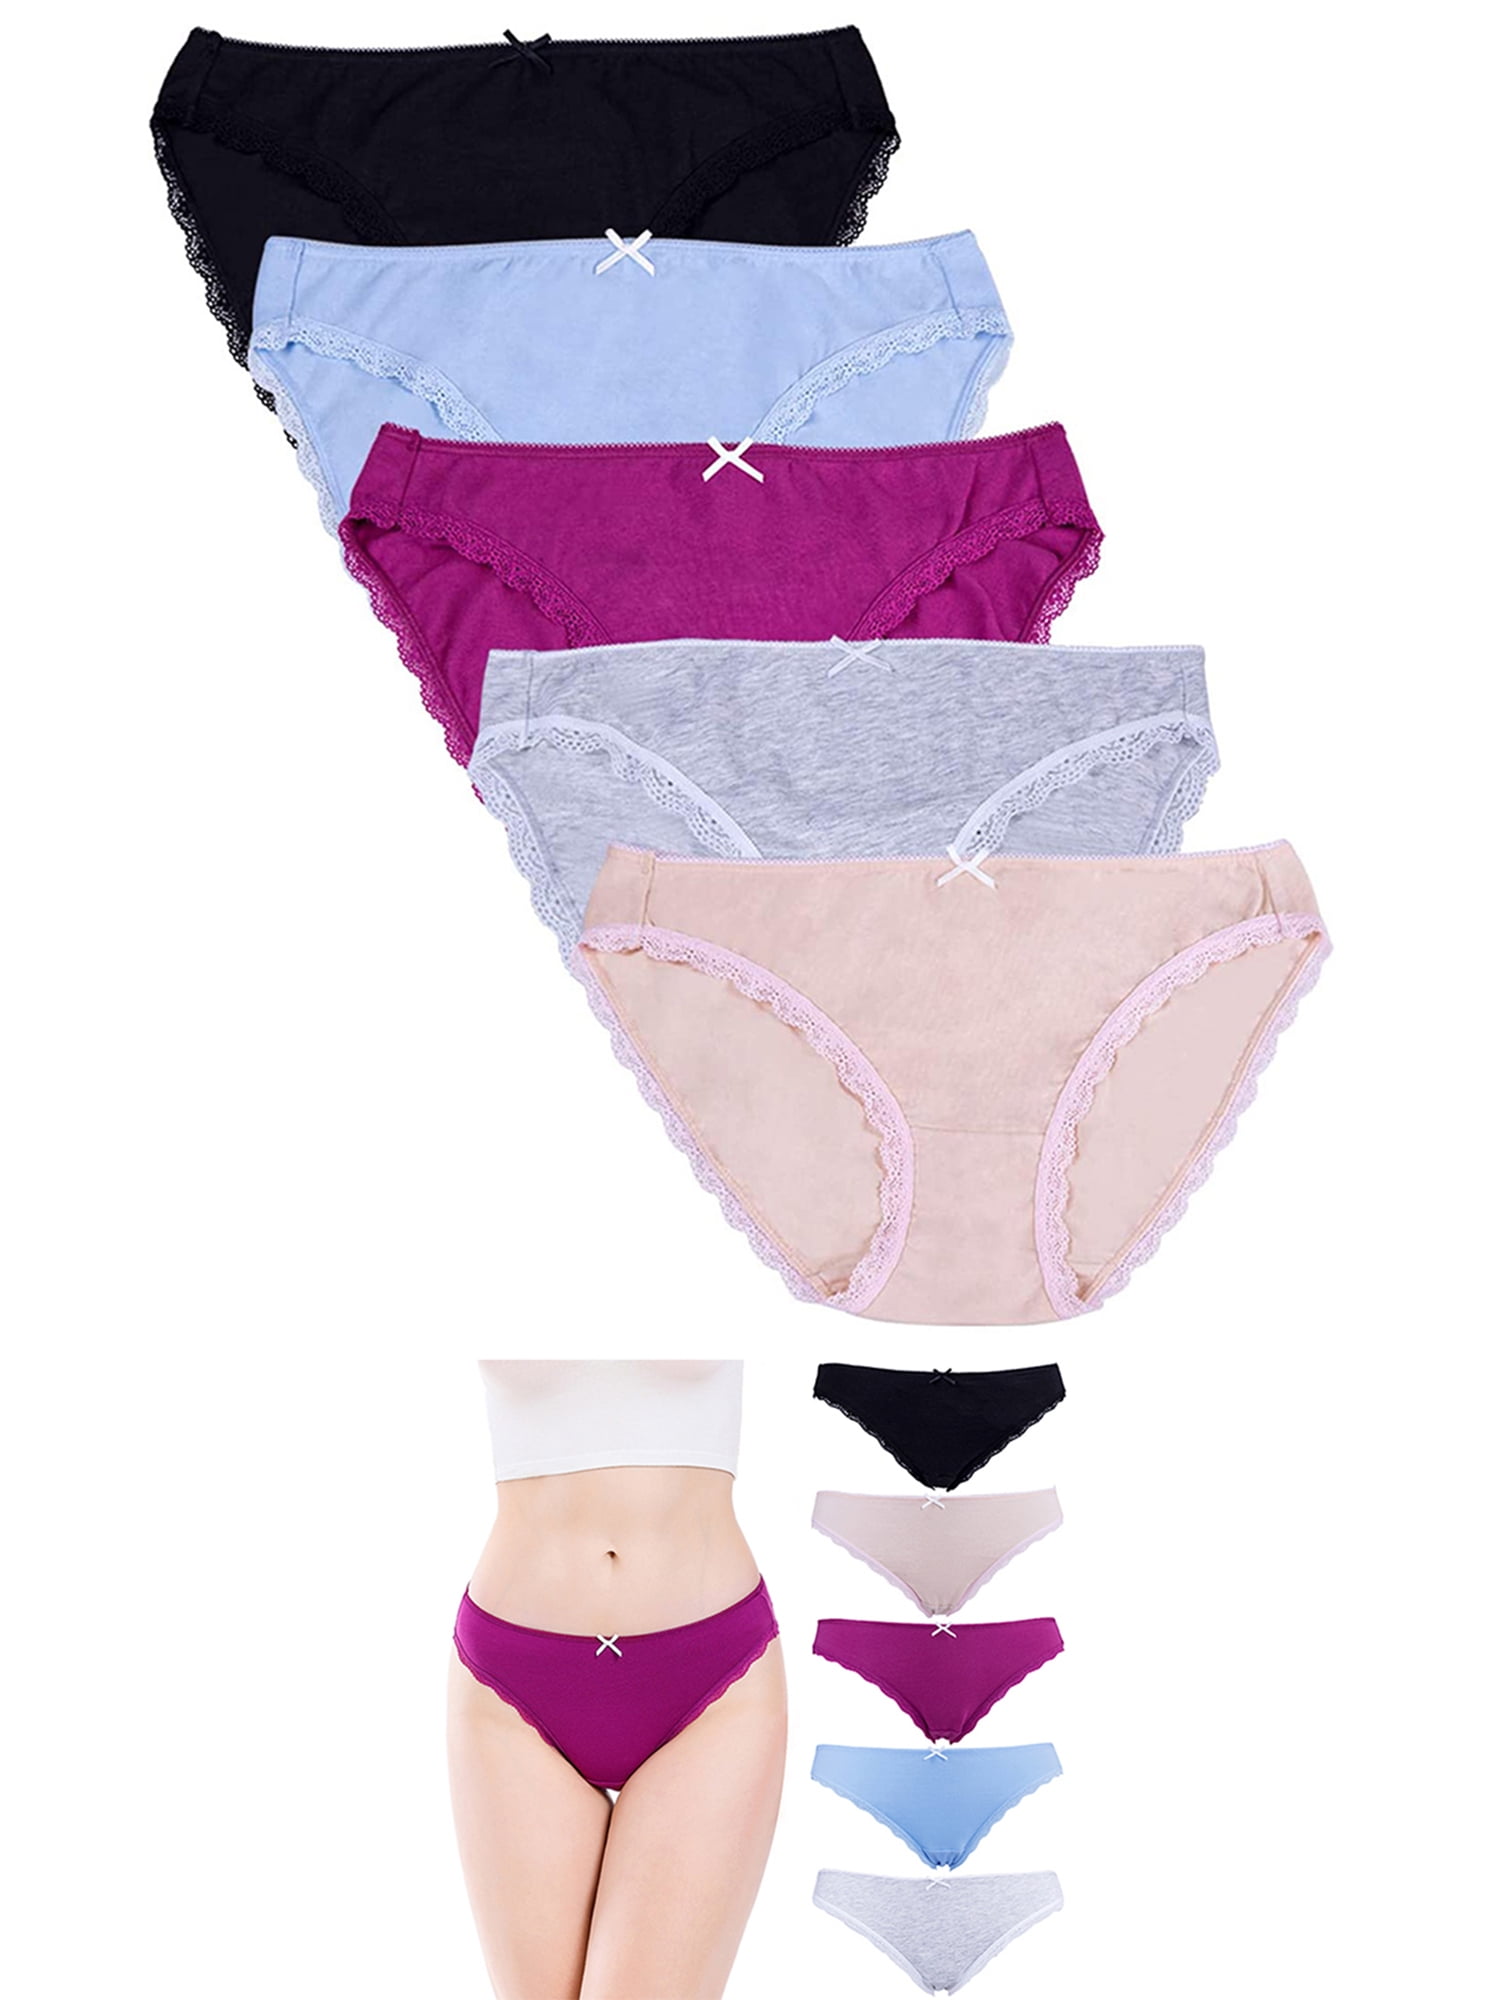 Cotton Plus Size Underwear for Women Lace Bikini Panties Soft Stretch  Hipster Breathable Briefs 5-Packs 